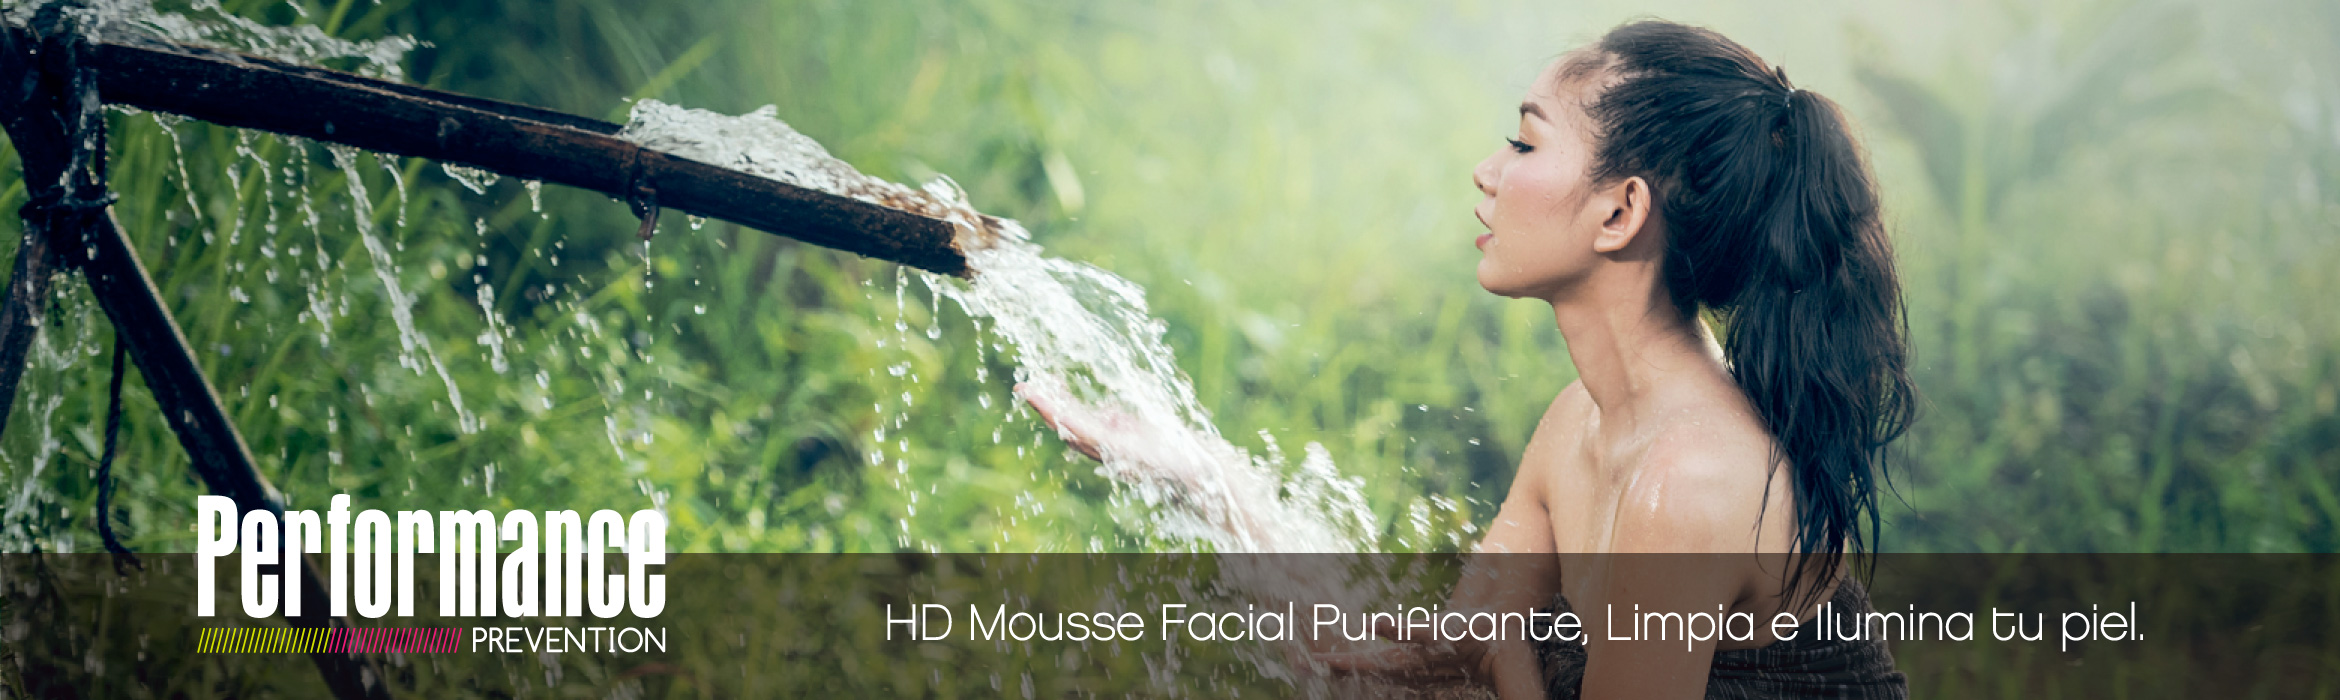 Mousse facial Hydradermica